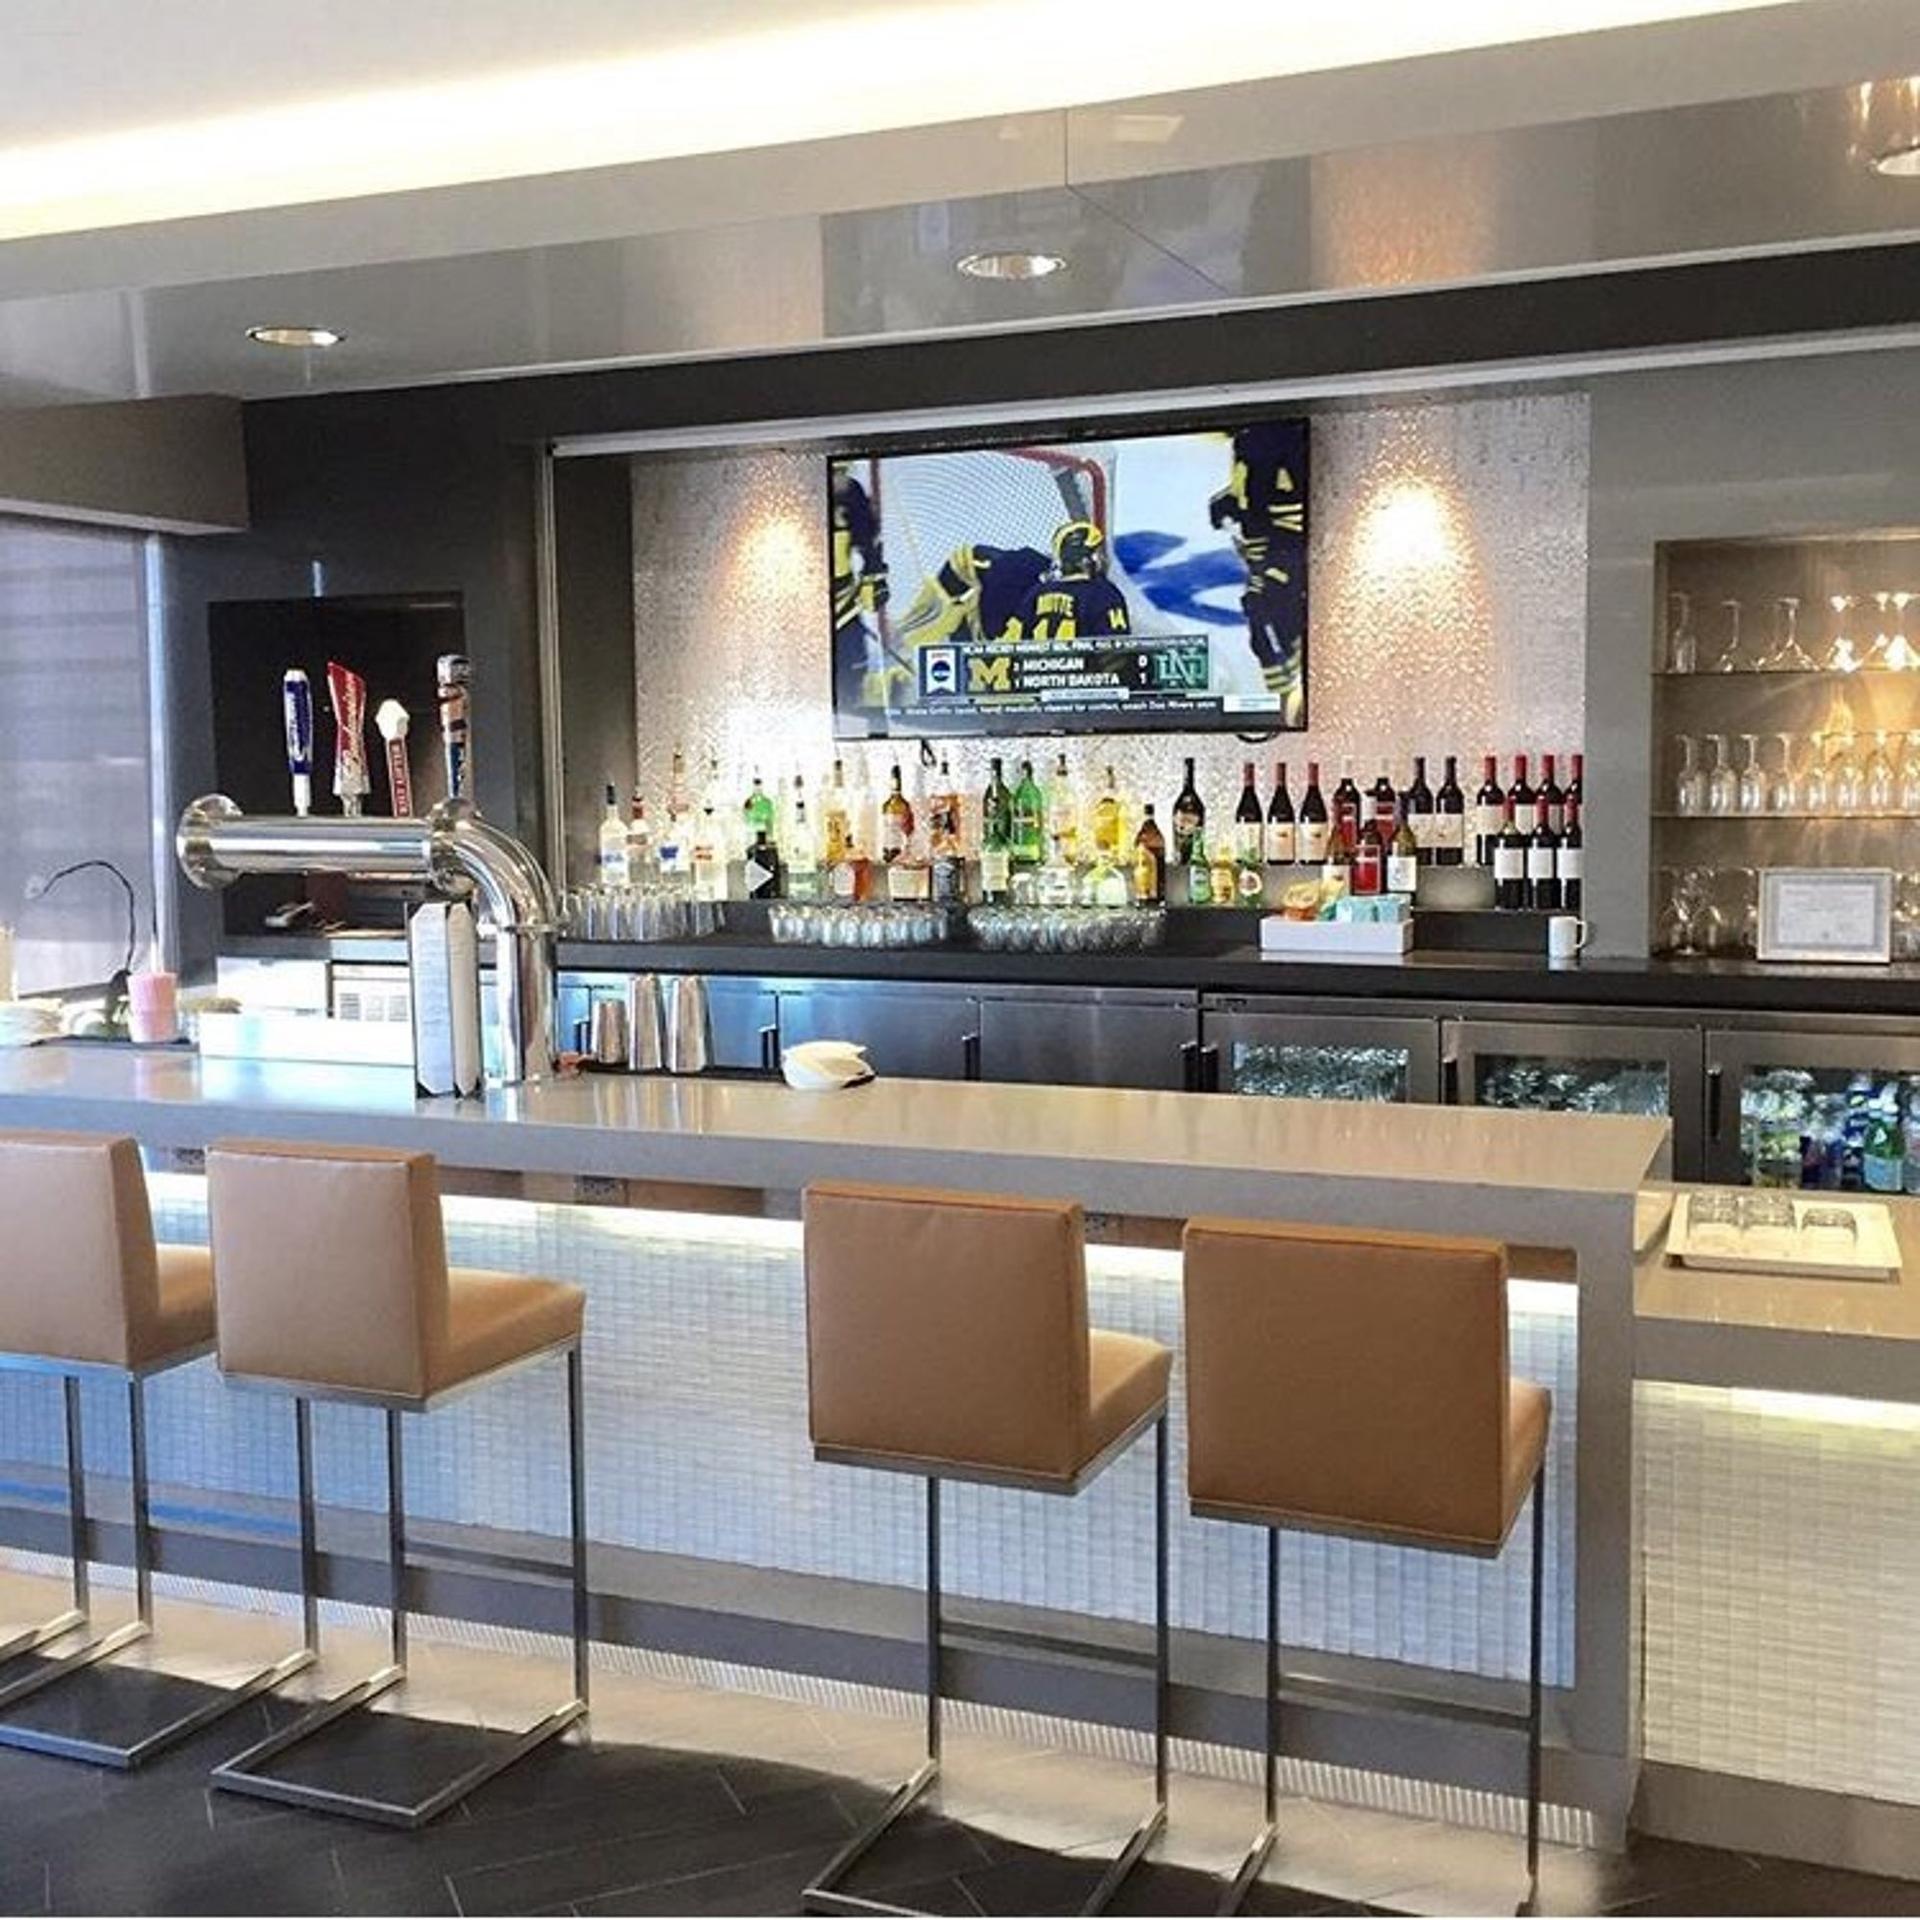 American Airlines Admirals Club (Gate A7) image 4 of 25